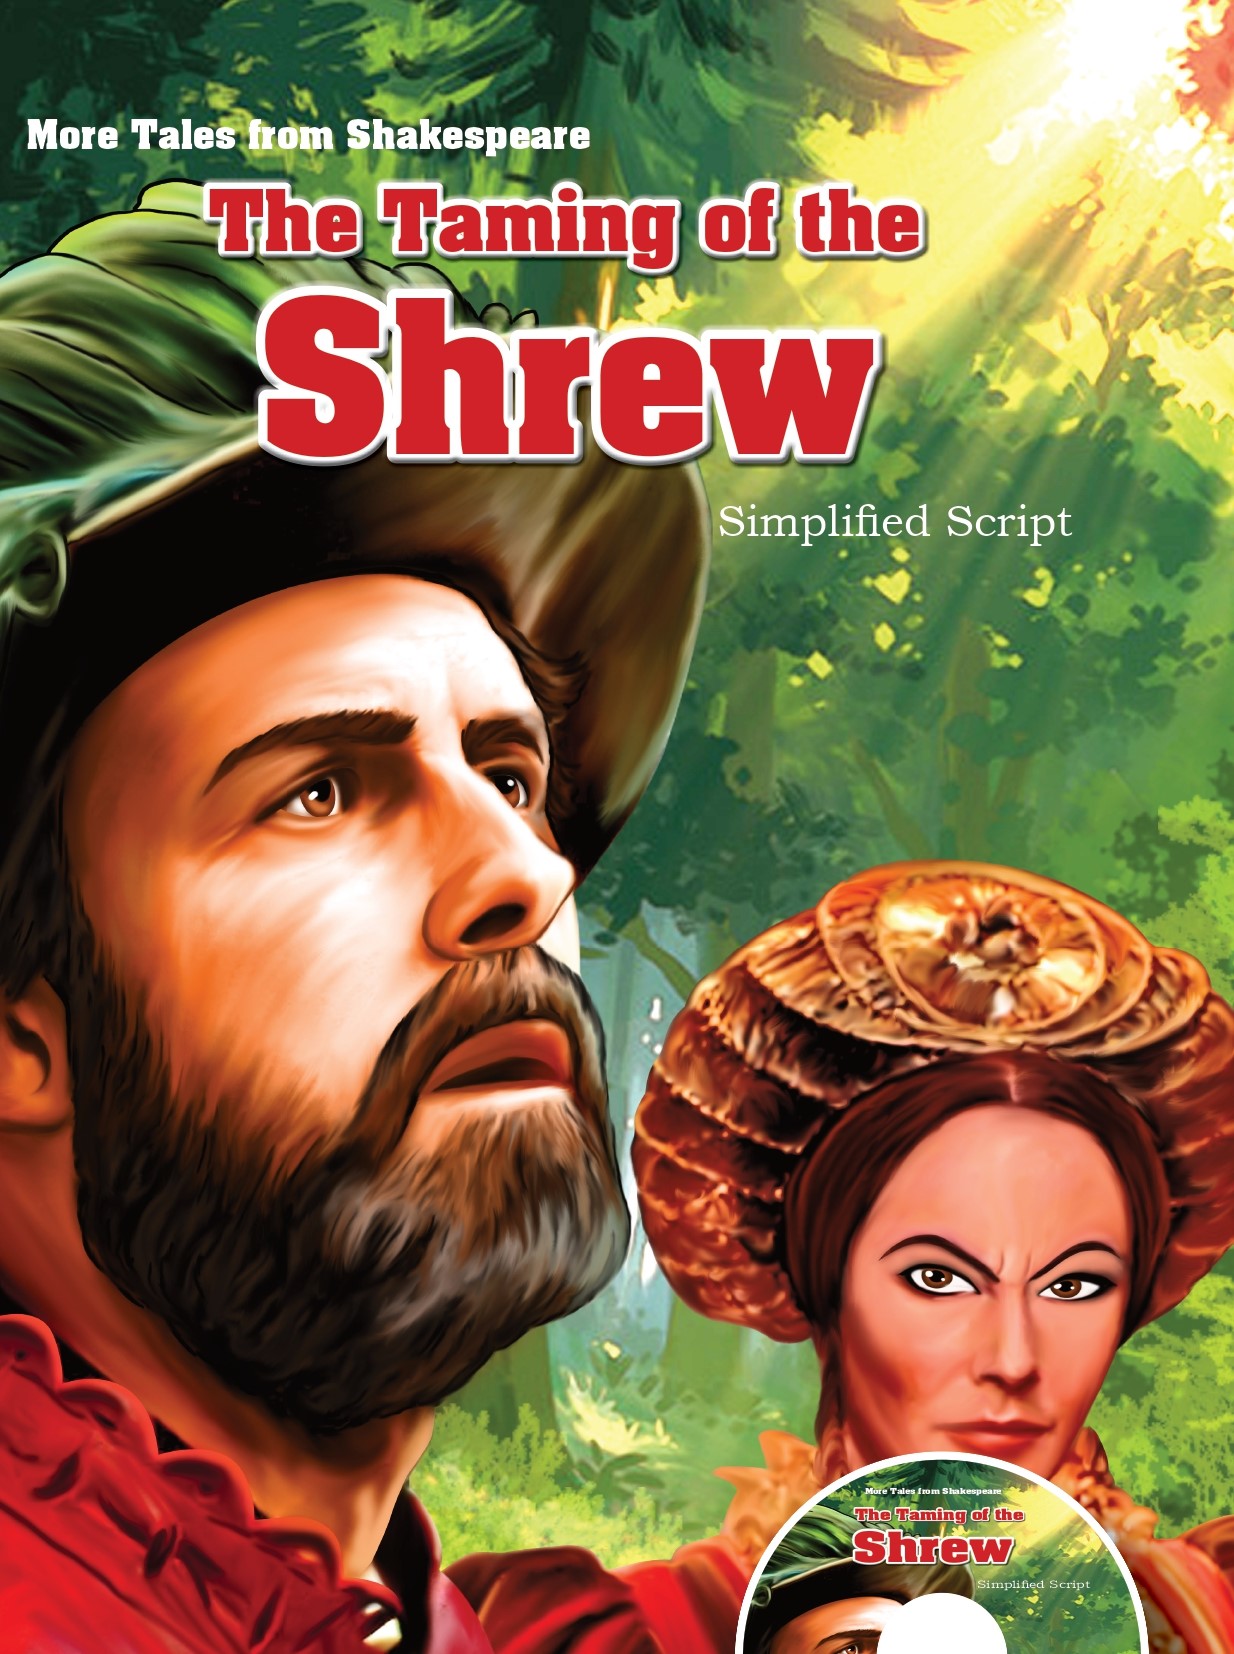 More Tales from Shakespeare - The Taming of the Shrew - Simplified Script